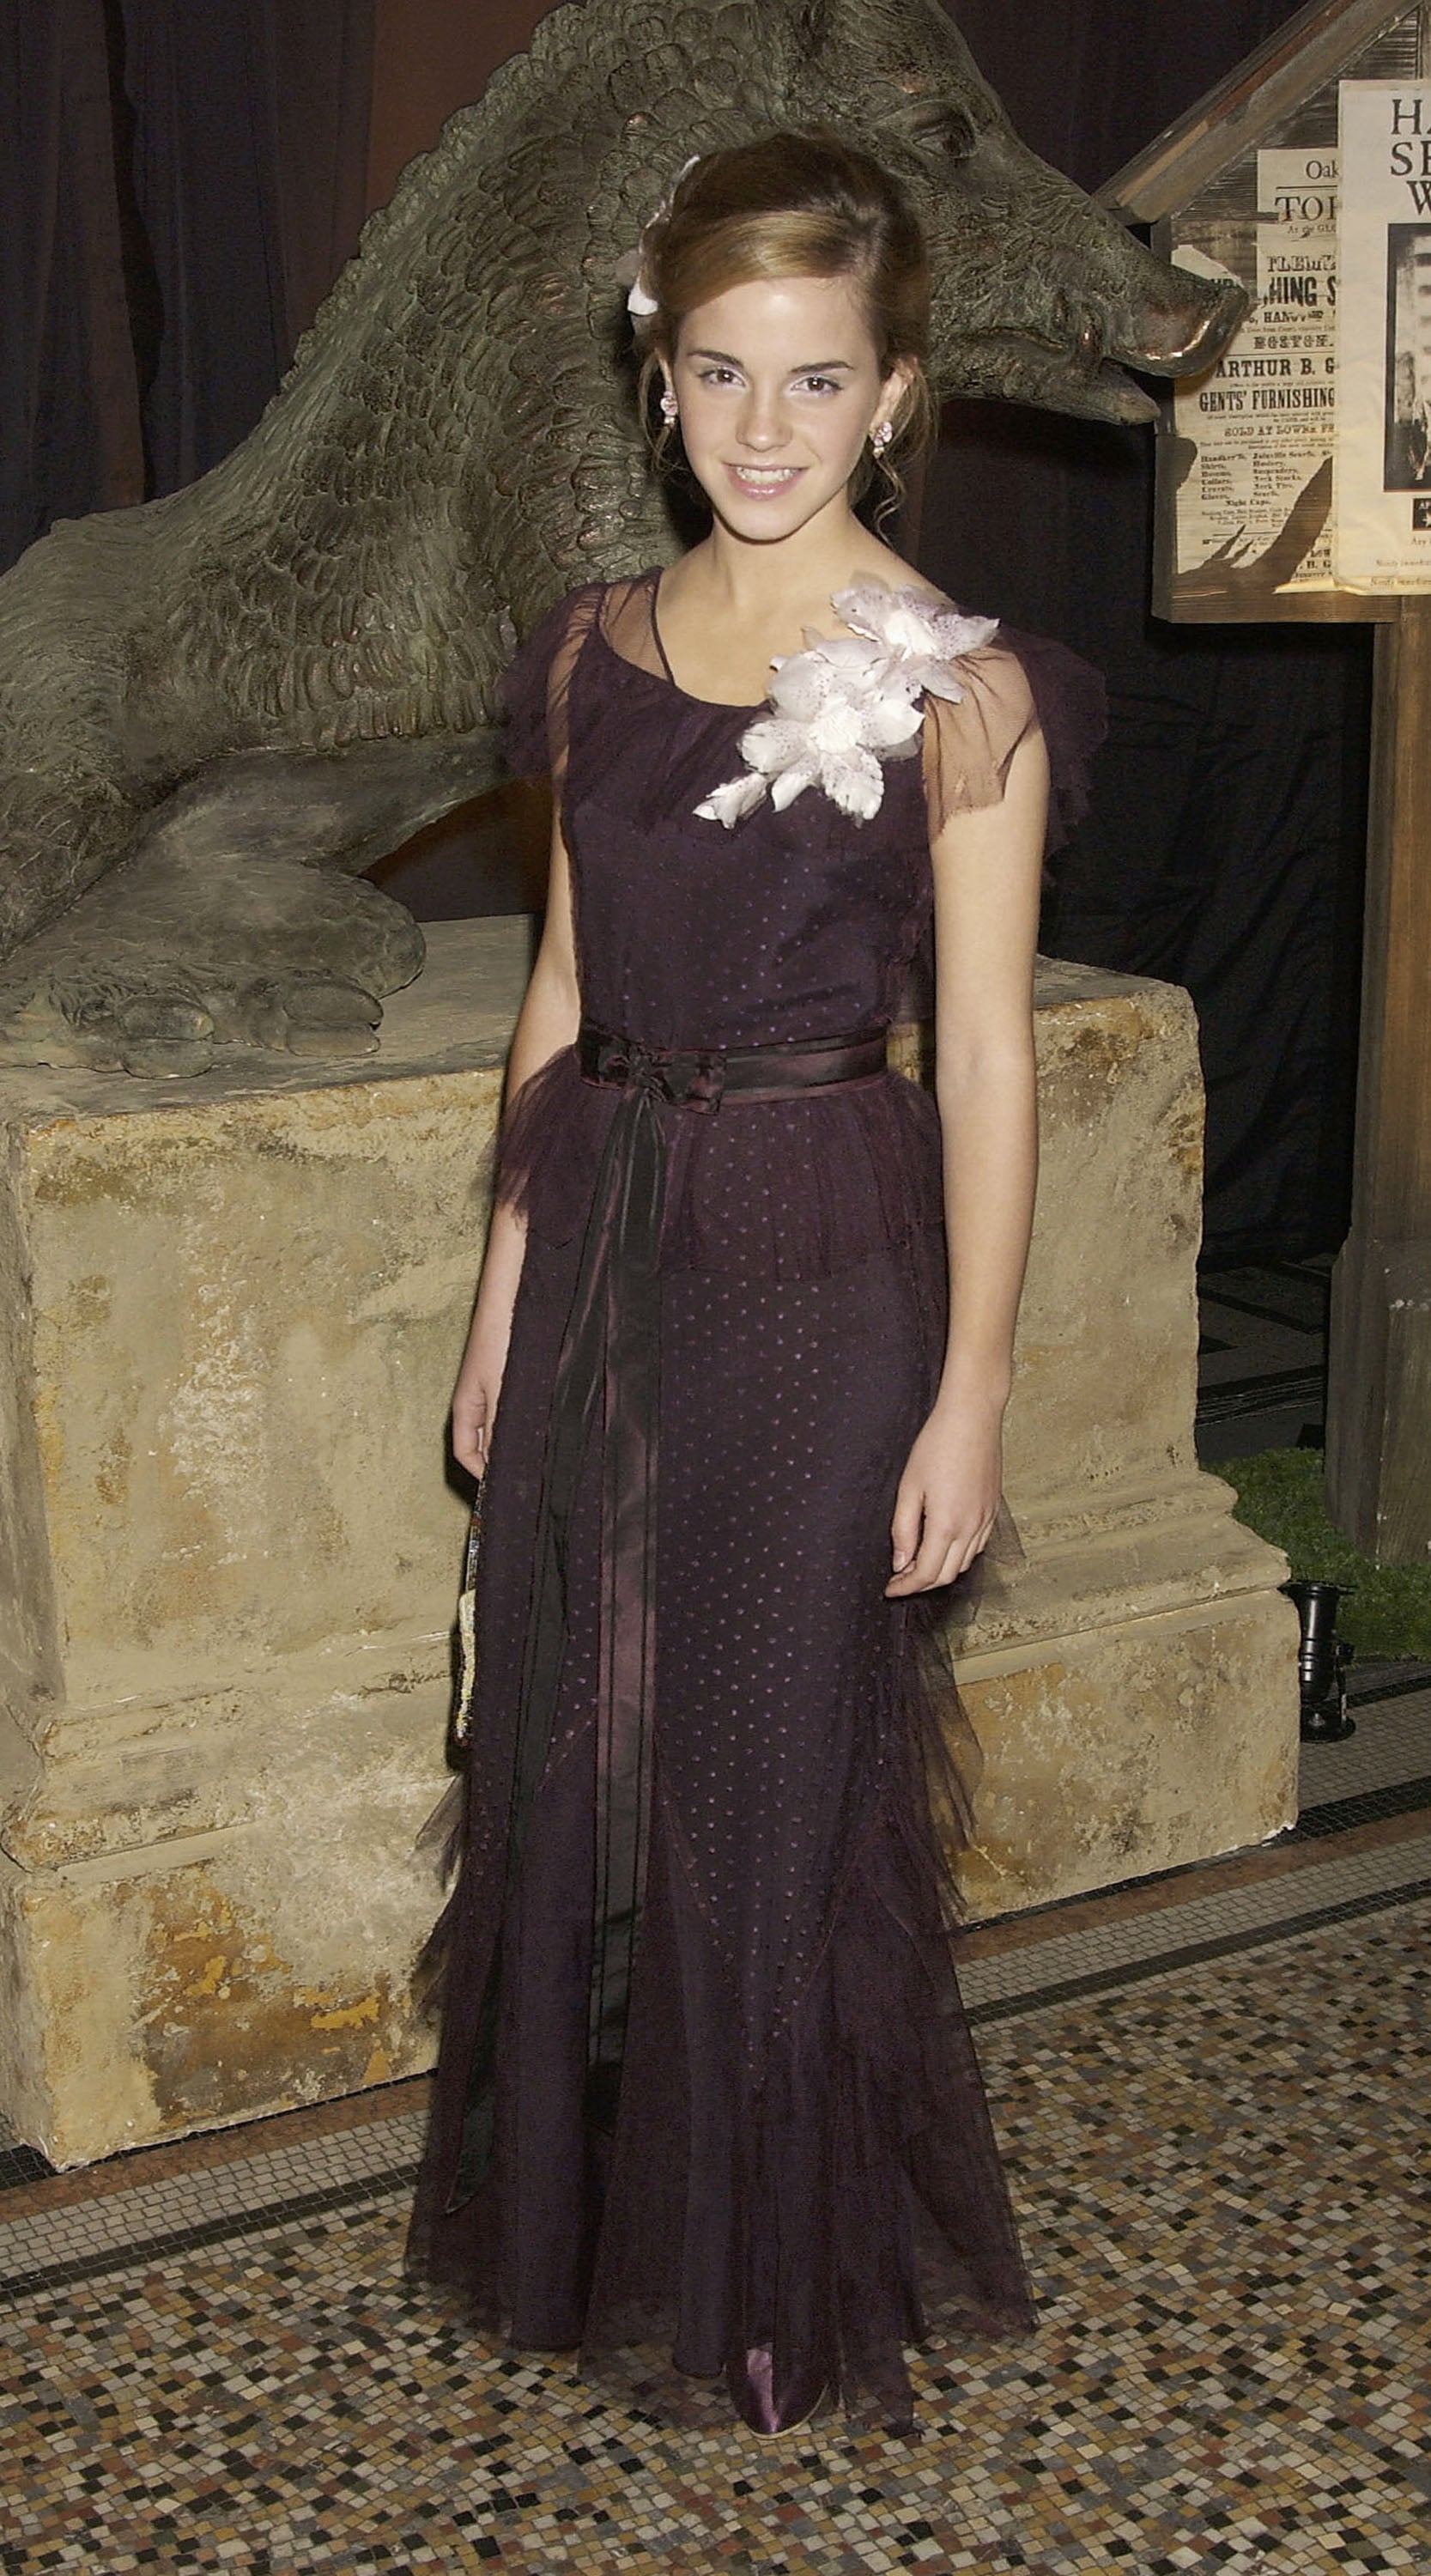 For The 2004 Uk Premiere Of Harry Potter And The Prisoner Of